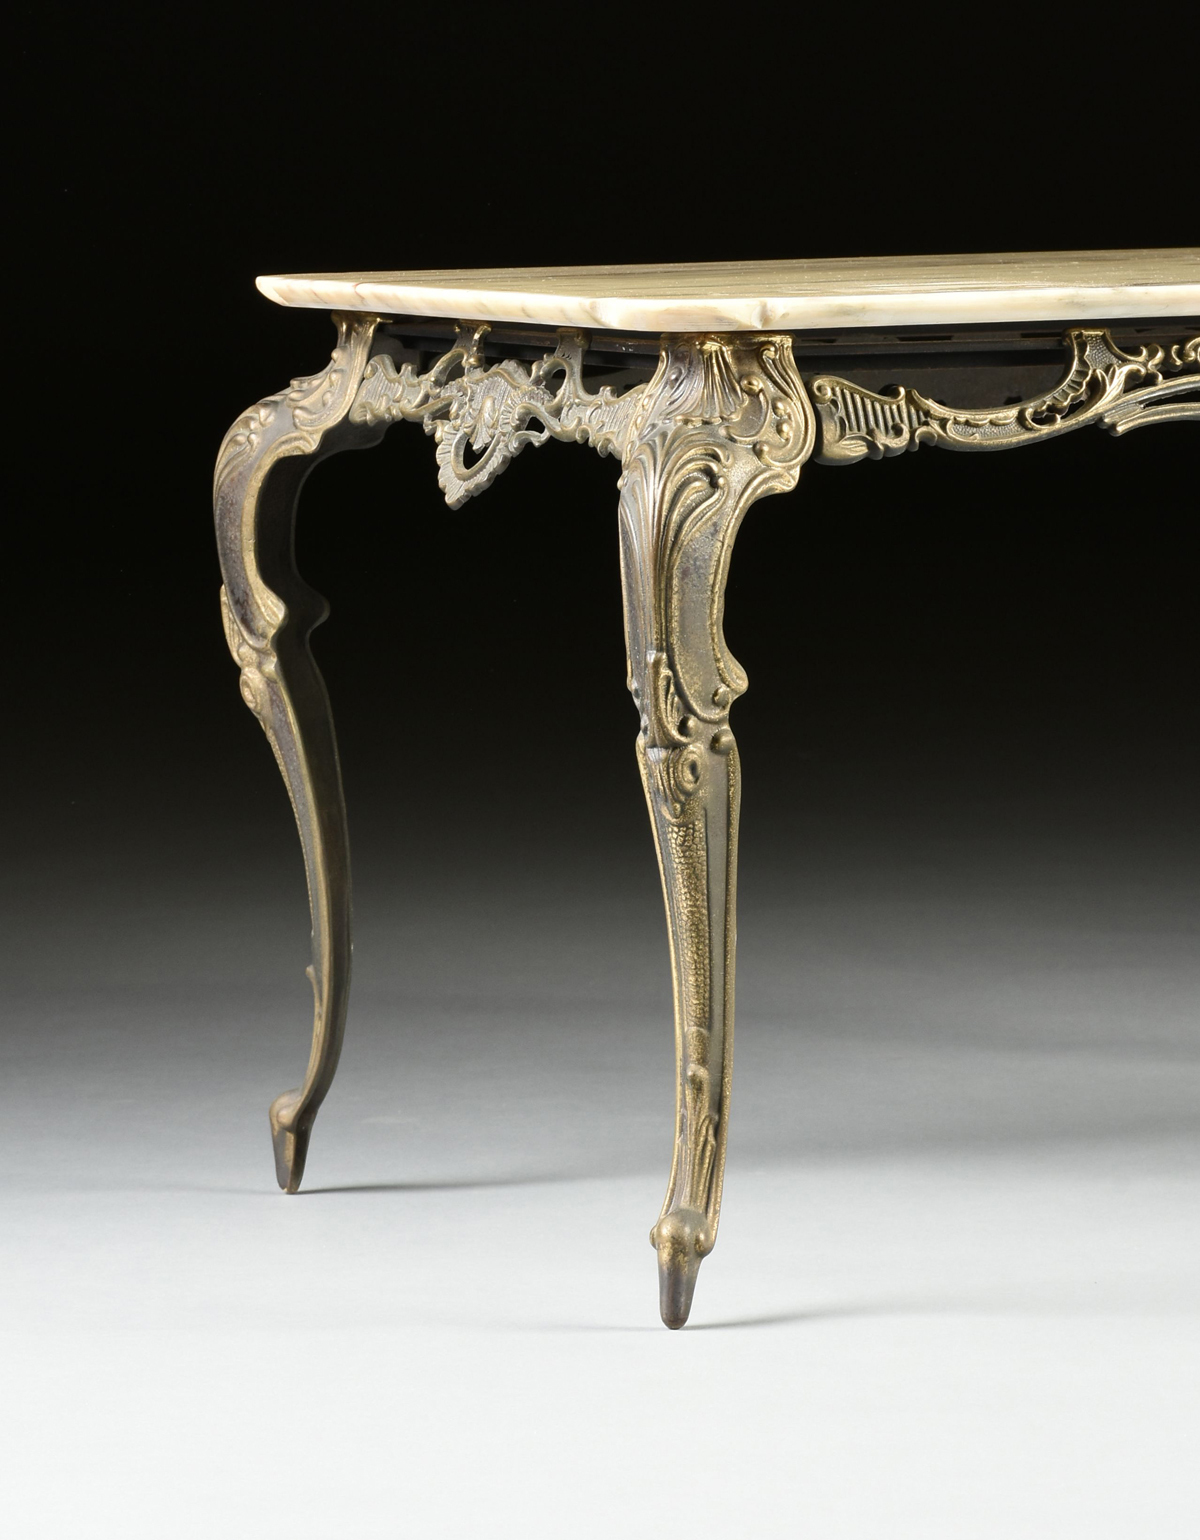 A ROCOCO REVIVAL MARBLE TOP GILT BRASS COFFEE TABLE, EARLY/MID 20TH CENTURY, the serpentine edge - Image 6 of 9